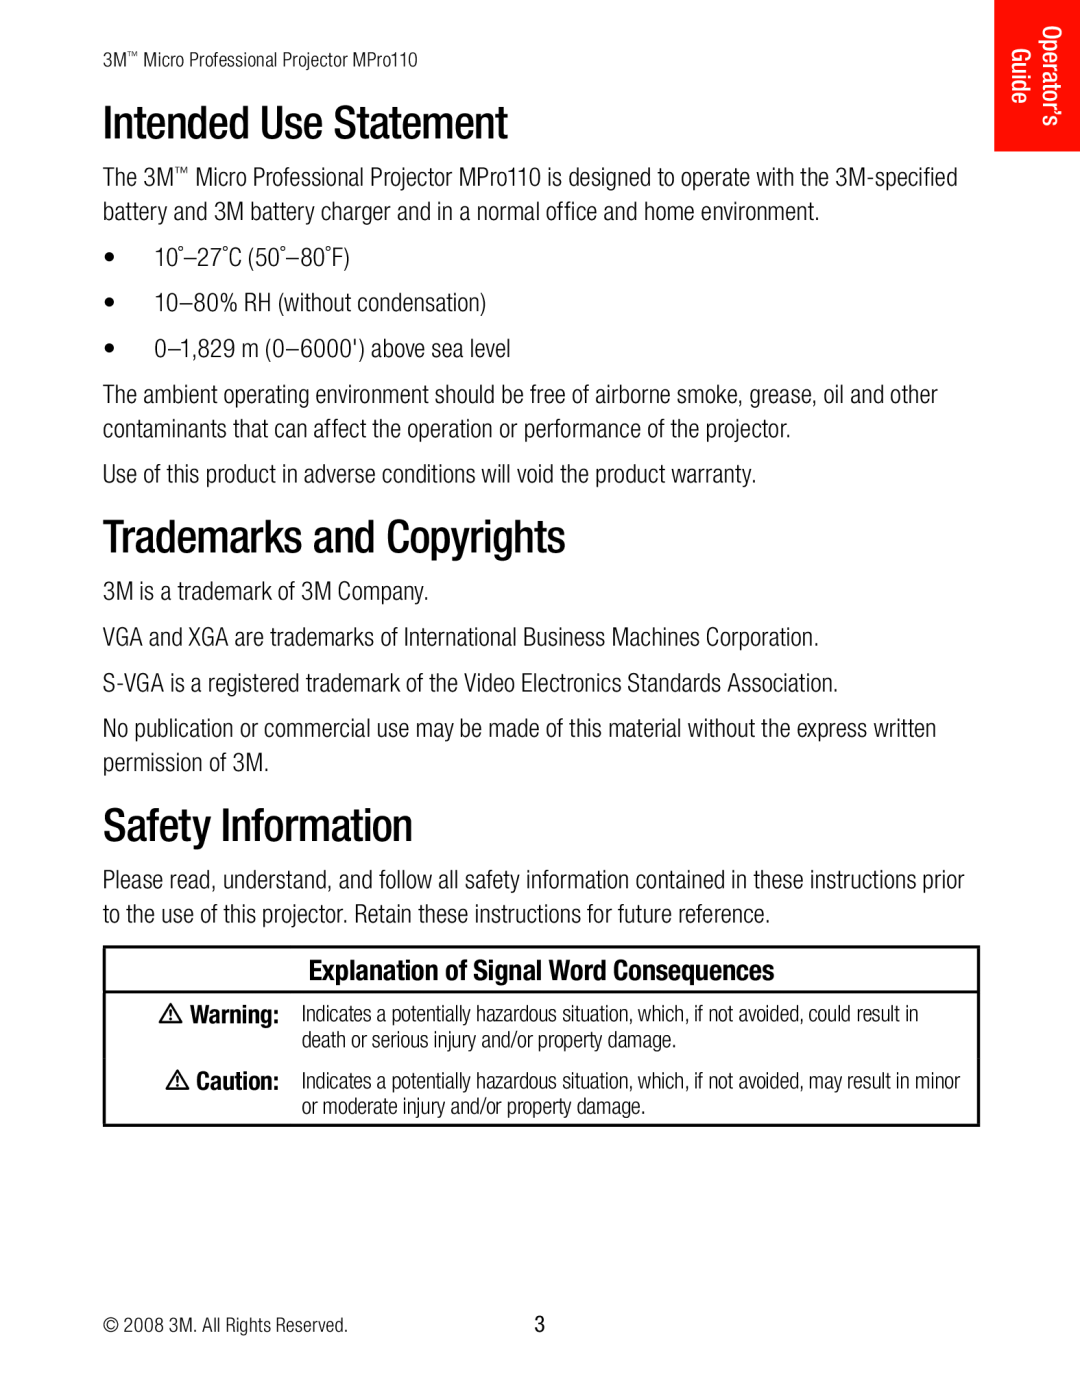 3M MPro110 Intended Use Statement, Trademarks and Copyrights, Safety Information, Explanation of Signal Word Consequences 